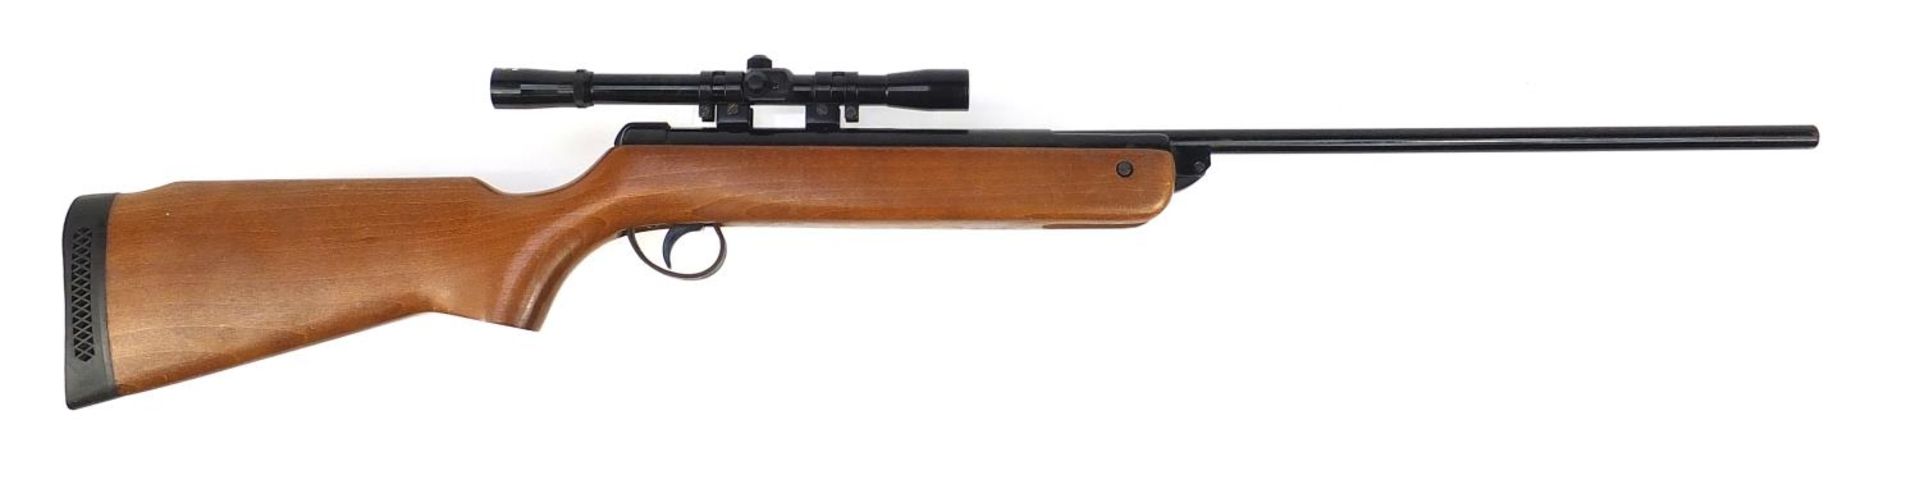 BSA Meteor .22 cal break barrel air rifle with Hunter 4x20 spotting scope, the barrel numbered - Image 6 of 7